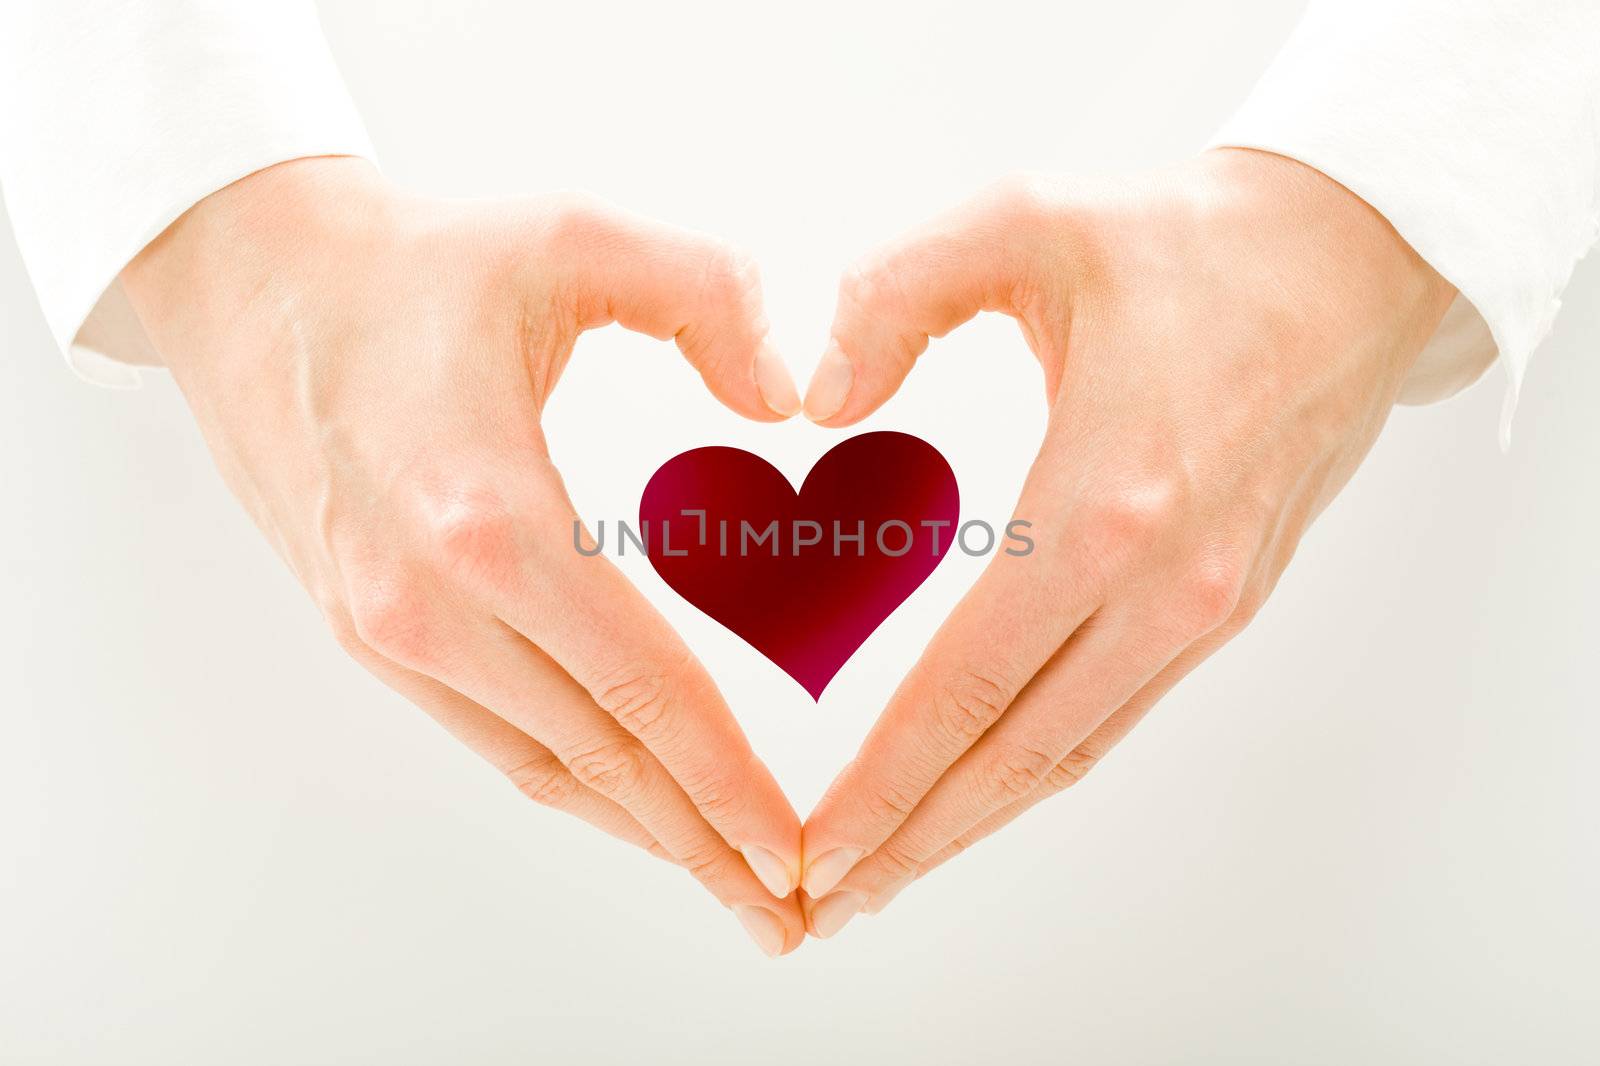 A small red heart in men's hands